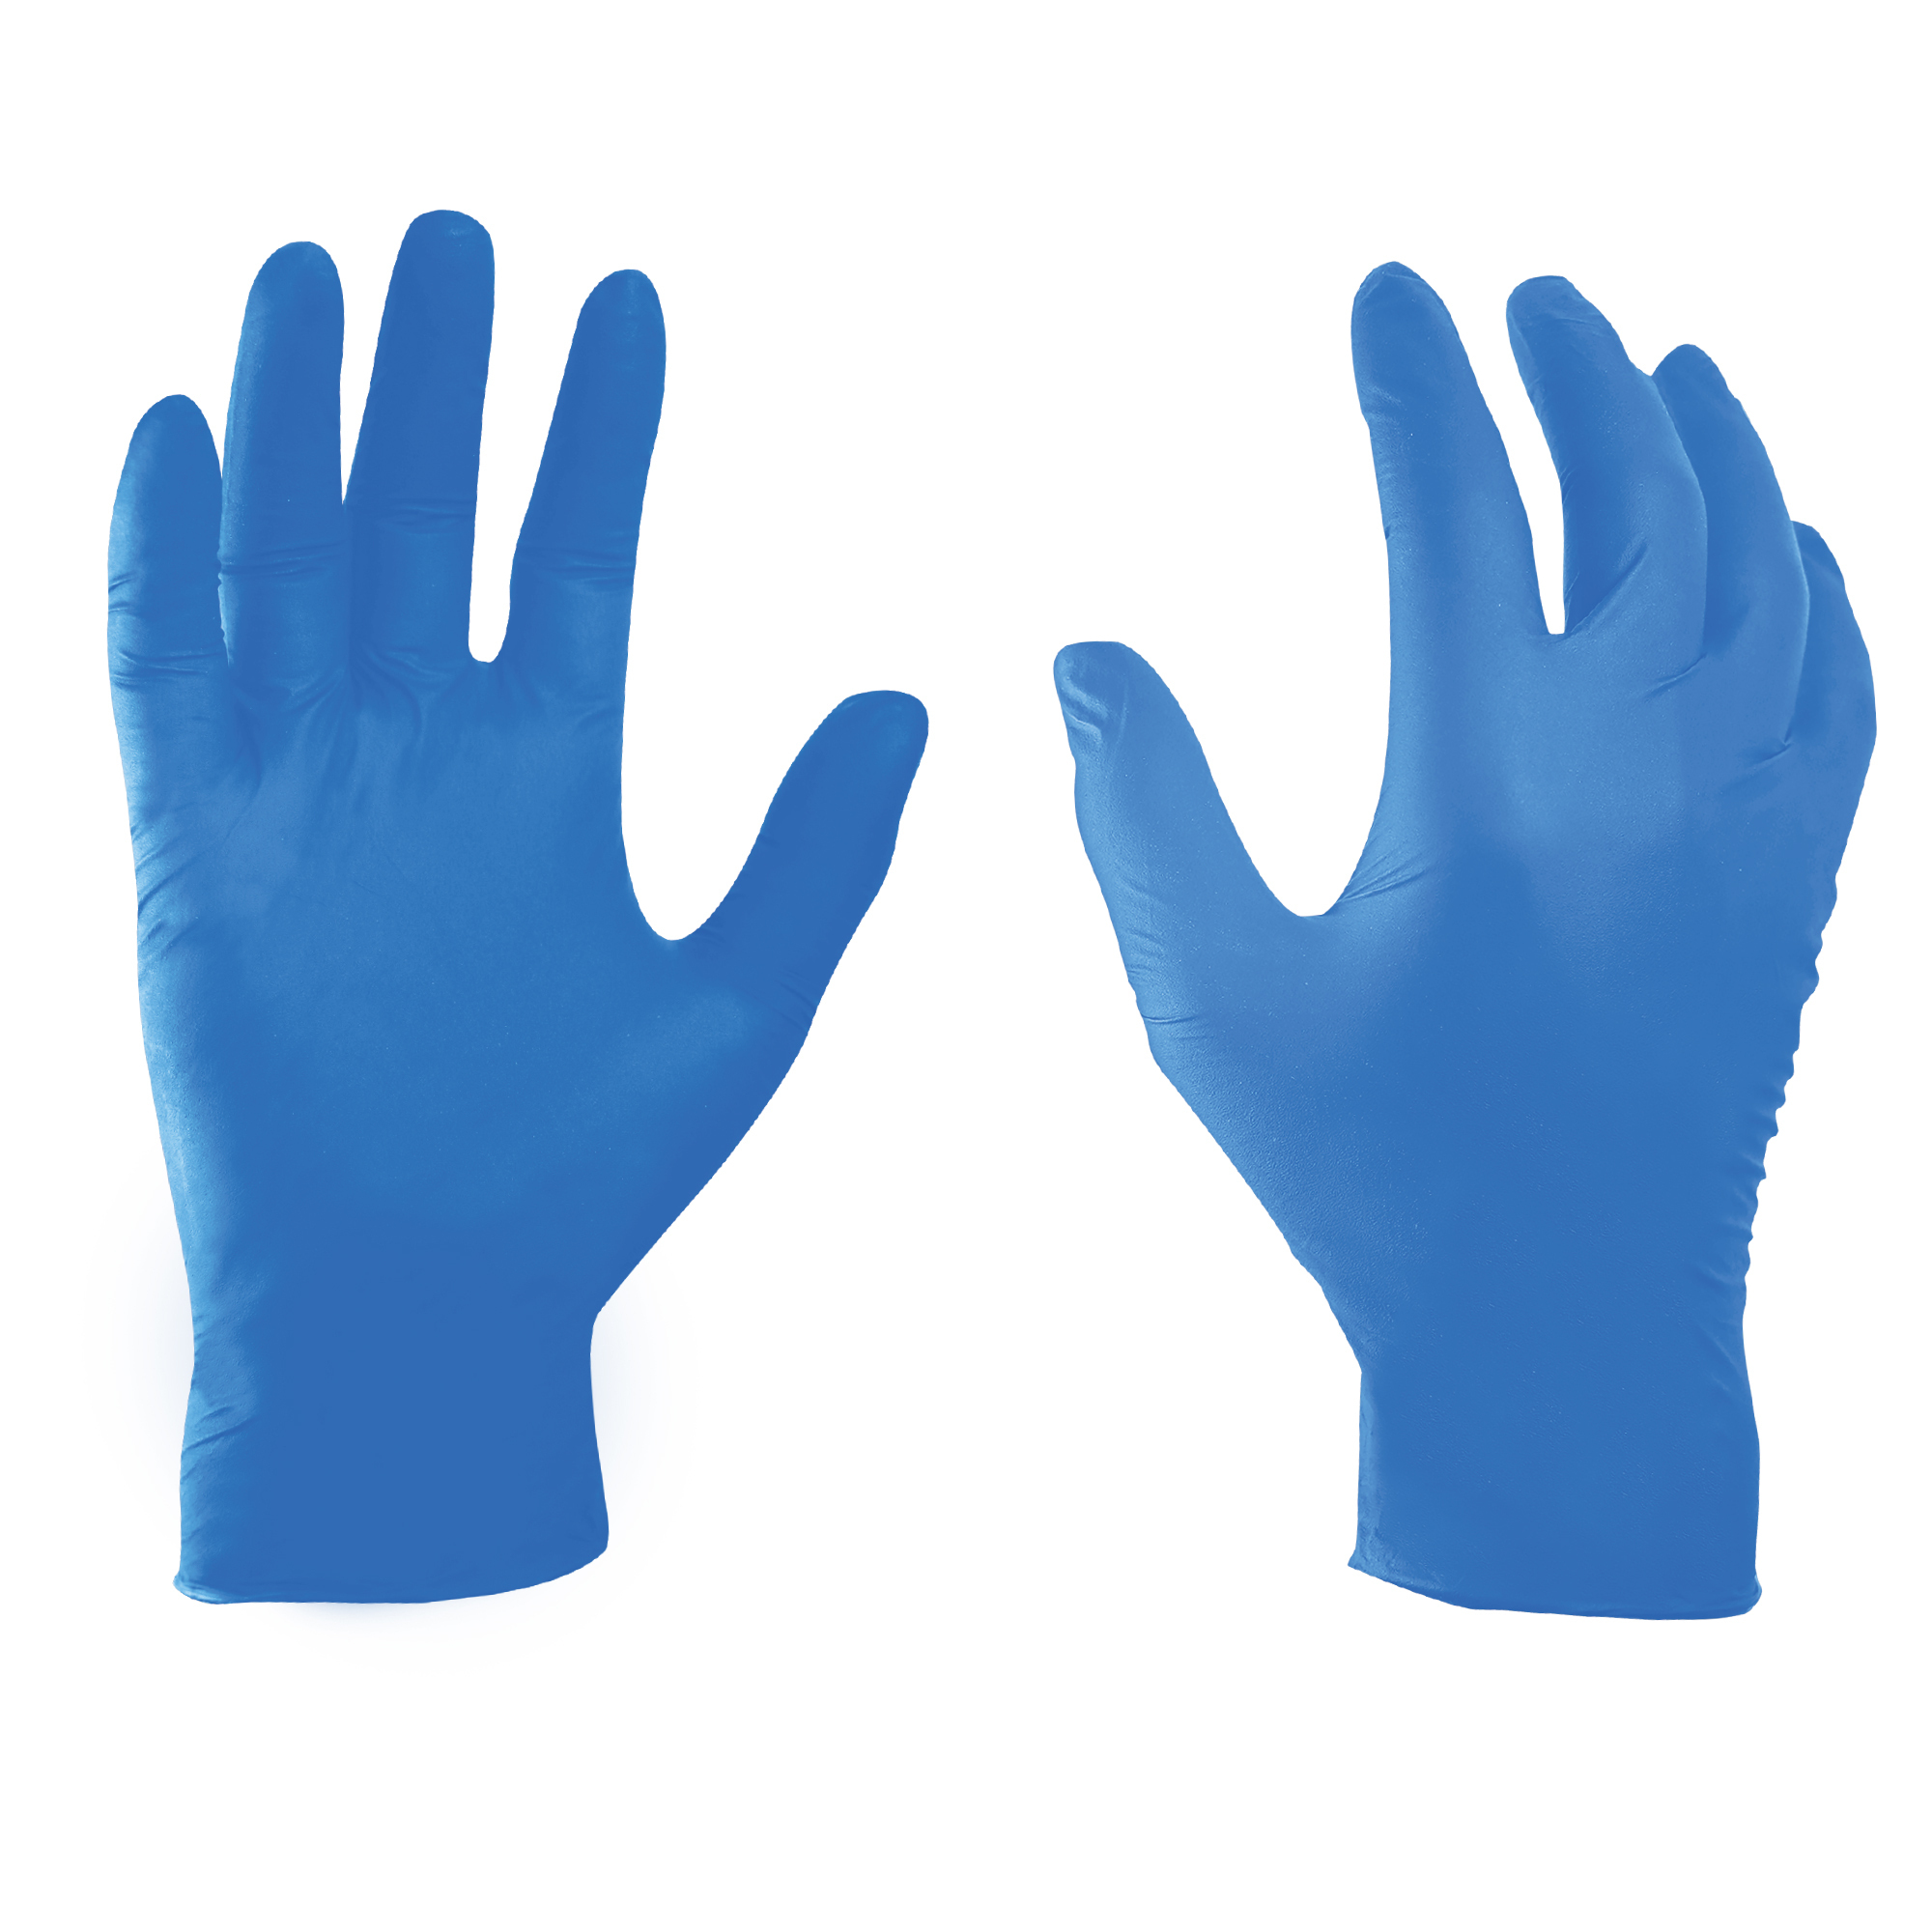 General Electric, 6mil Nitrile Blue Small Gloves 100pk, Size S, Color Blue, Included (qty.) 100 Model GG610S